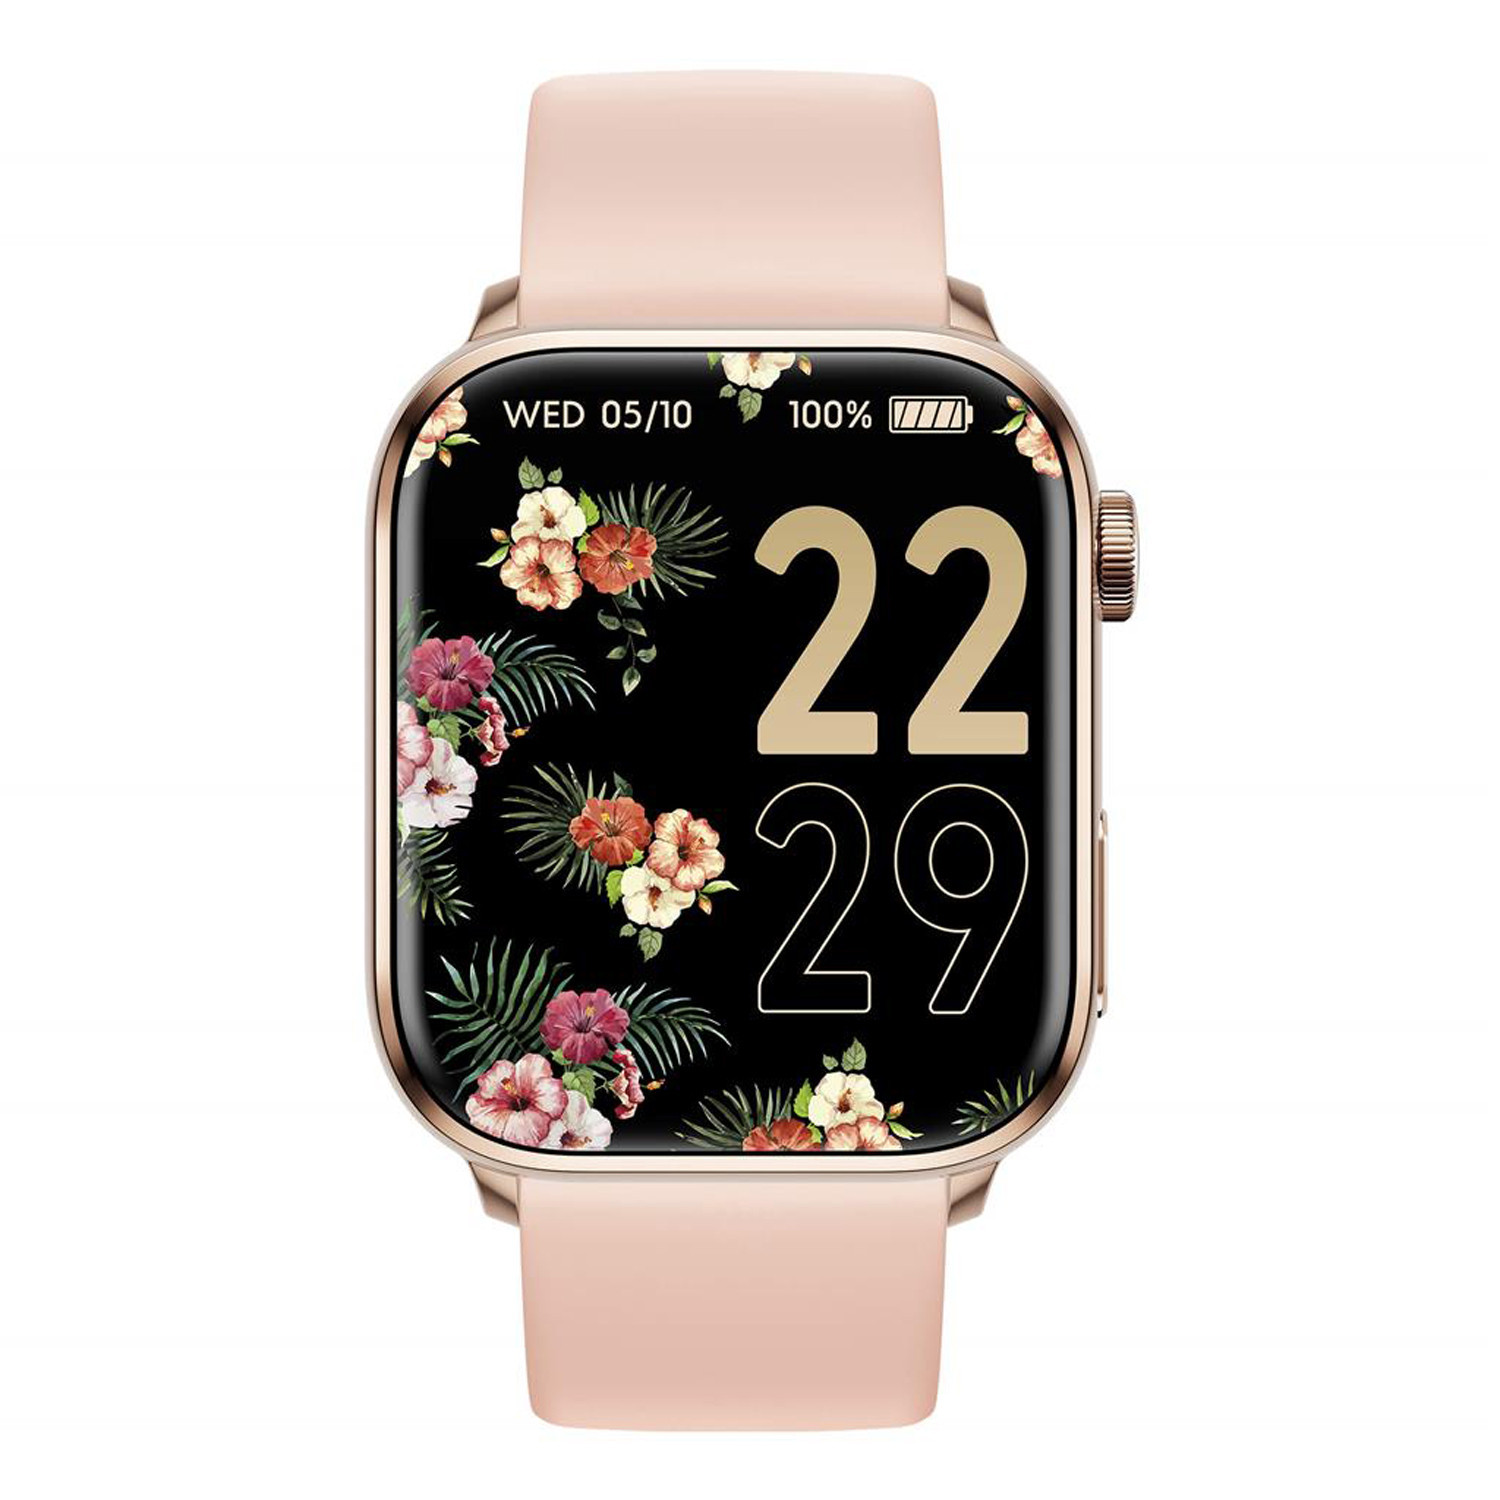 Montre femme Ice Watch connectée Ice Smart two
rose gold nude amoled